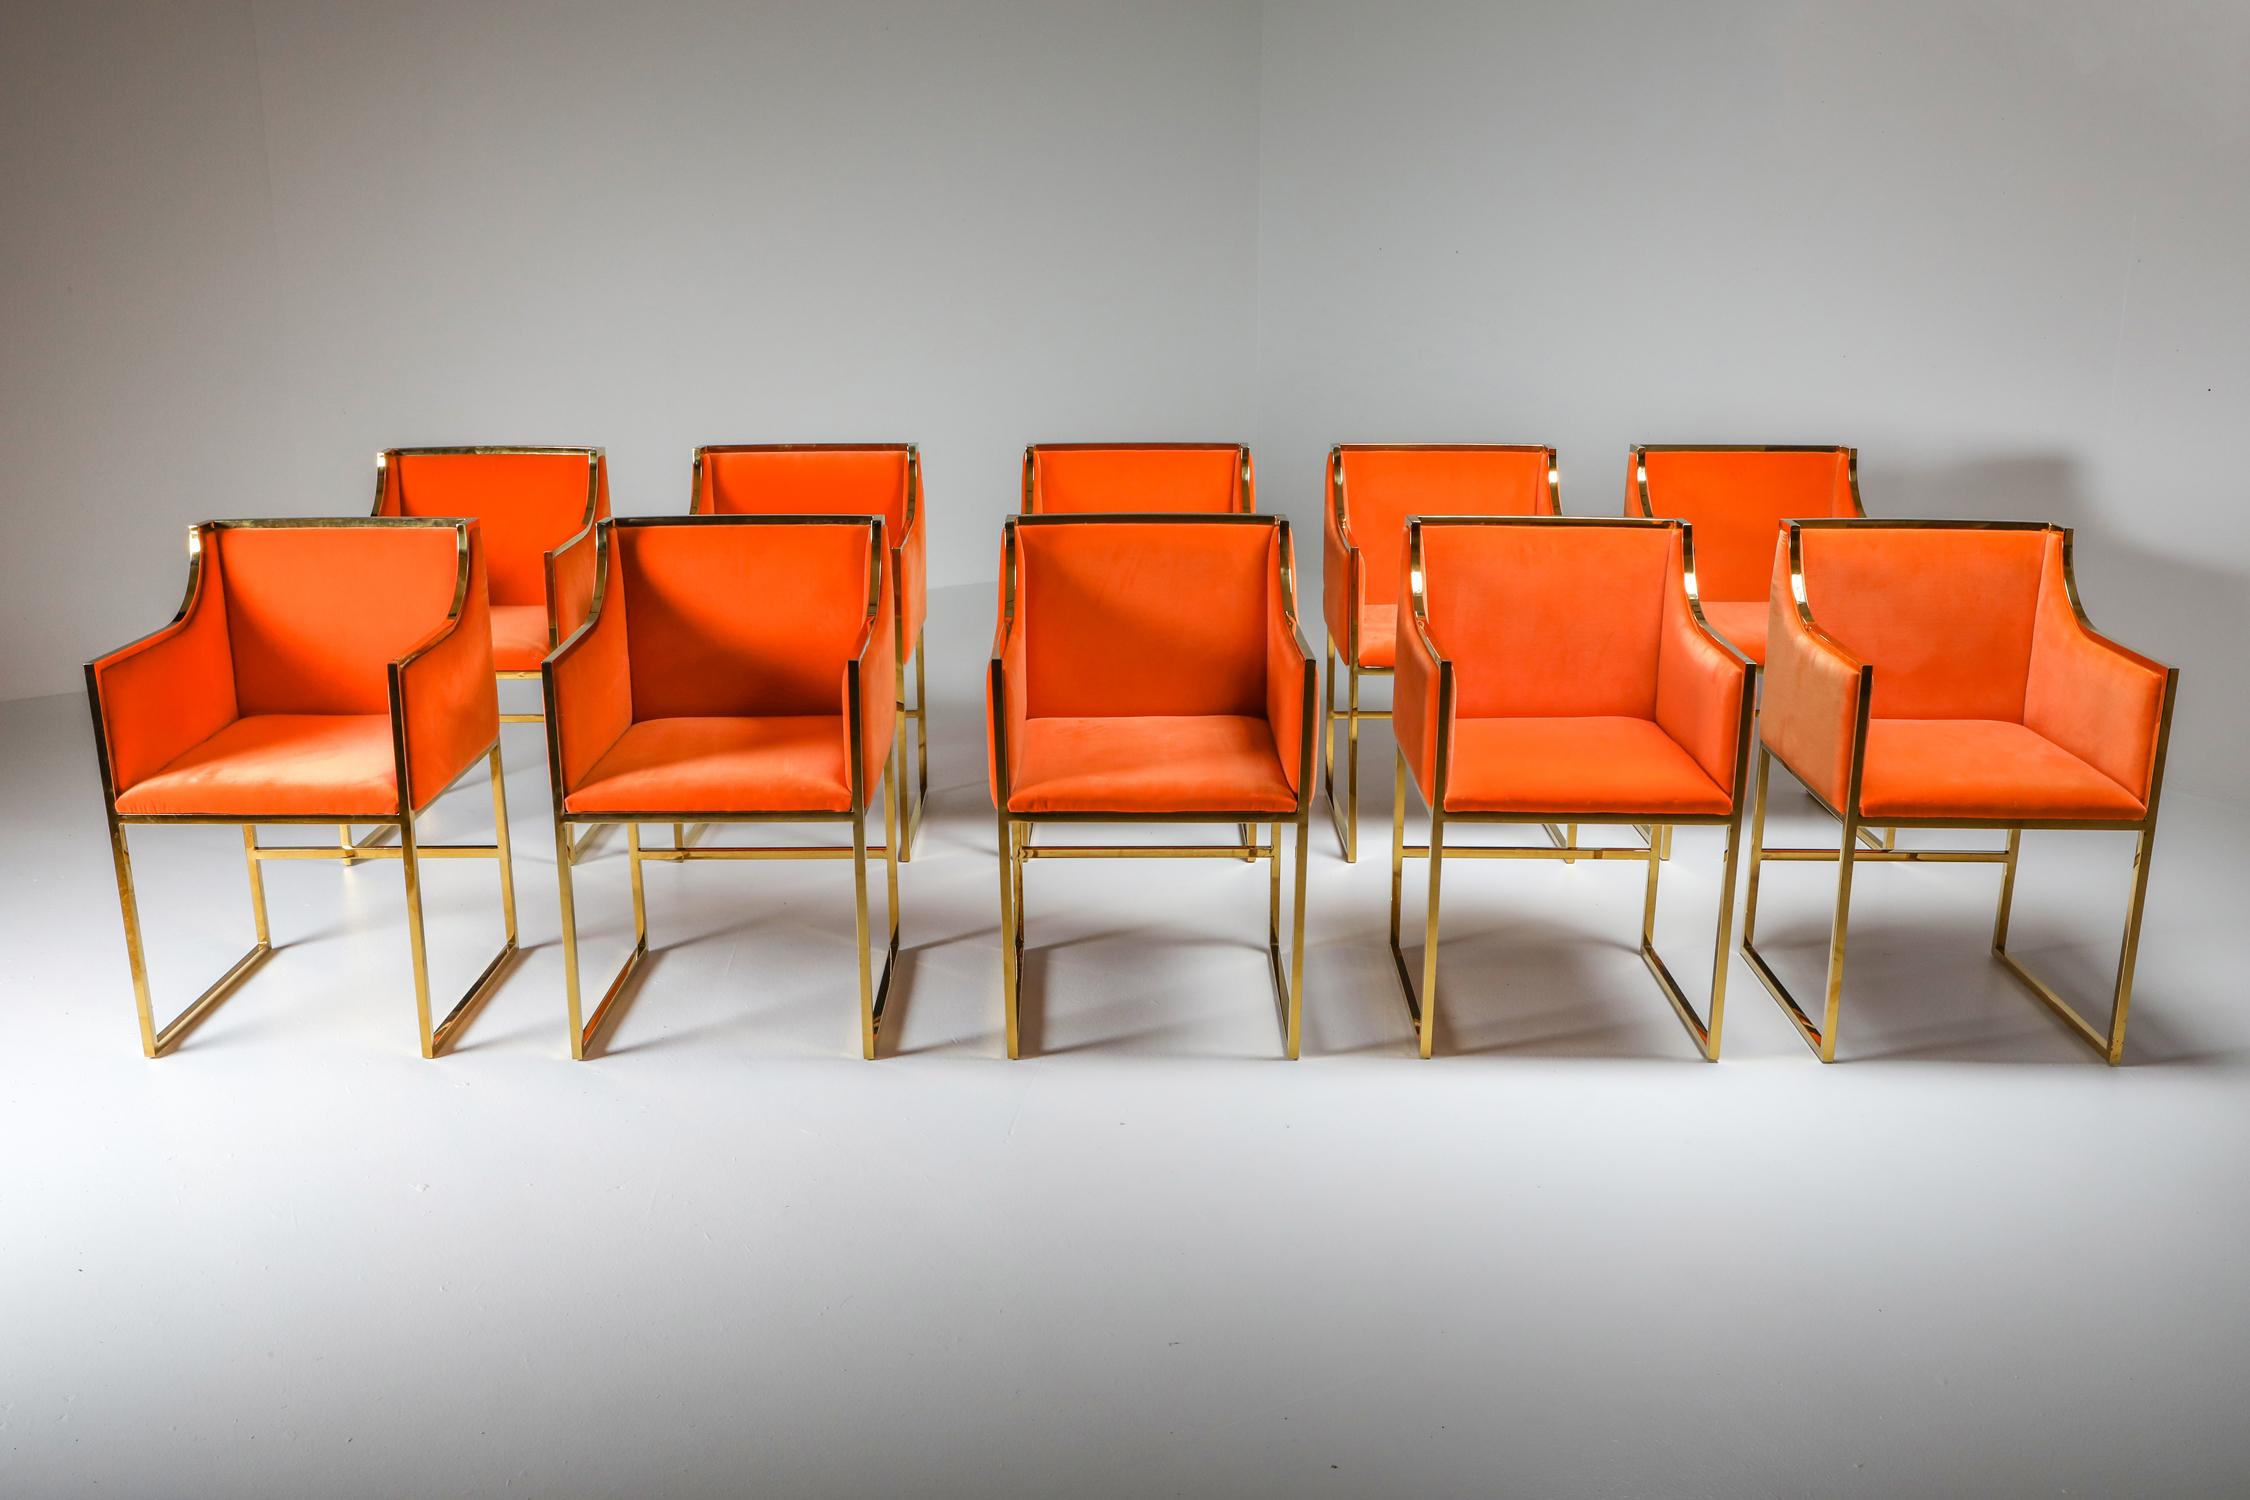 Late 20th Century Maison Jansen Brass and Orange Velvet Chairs, Four Available